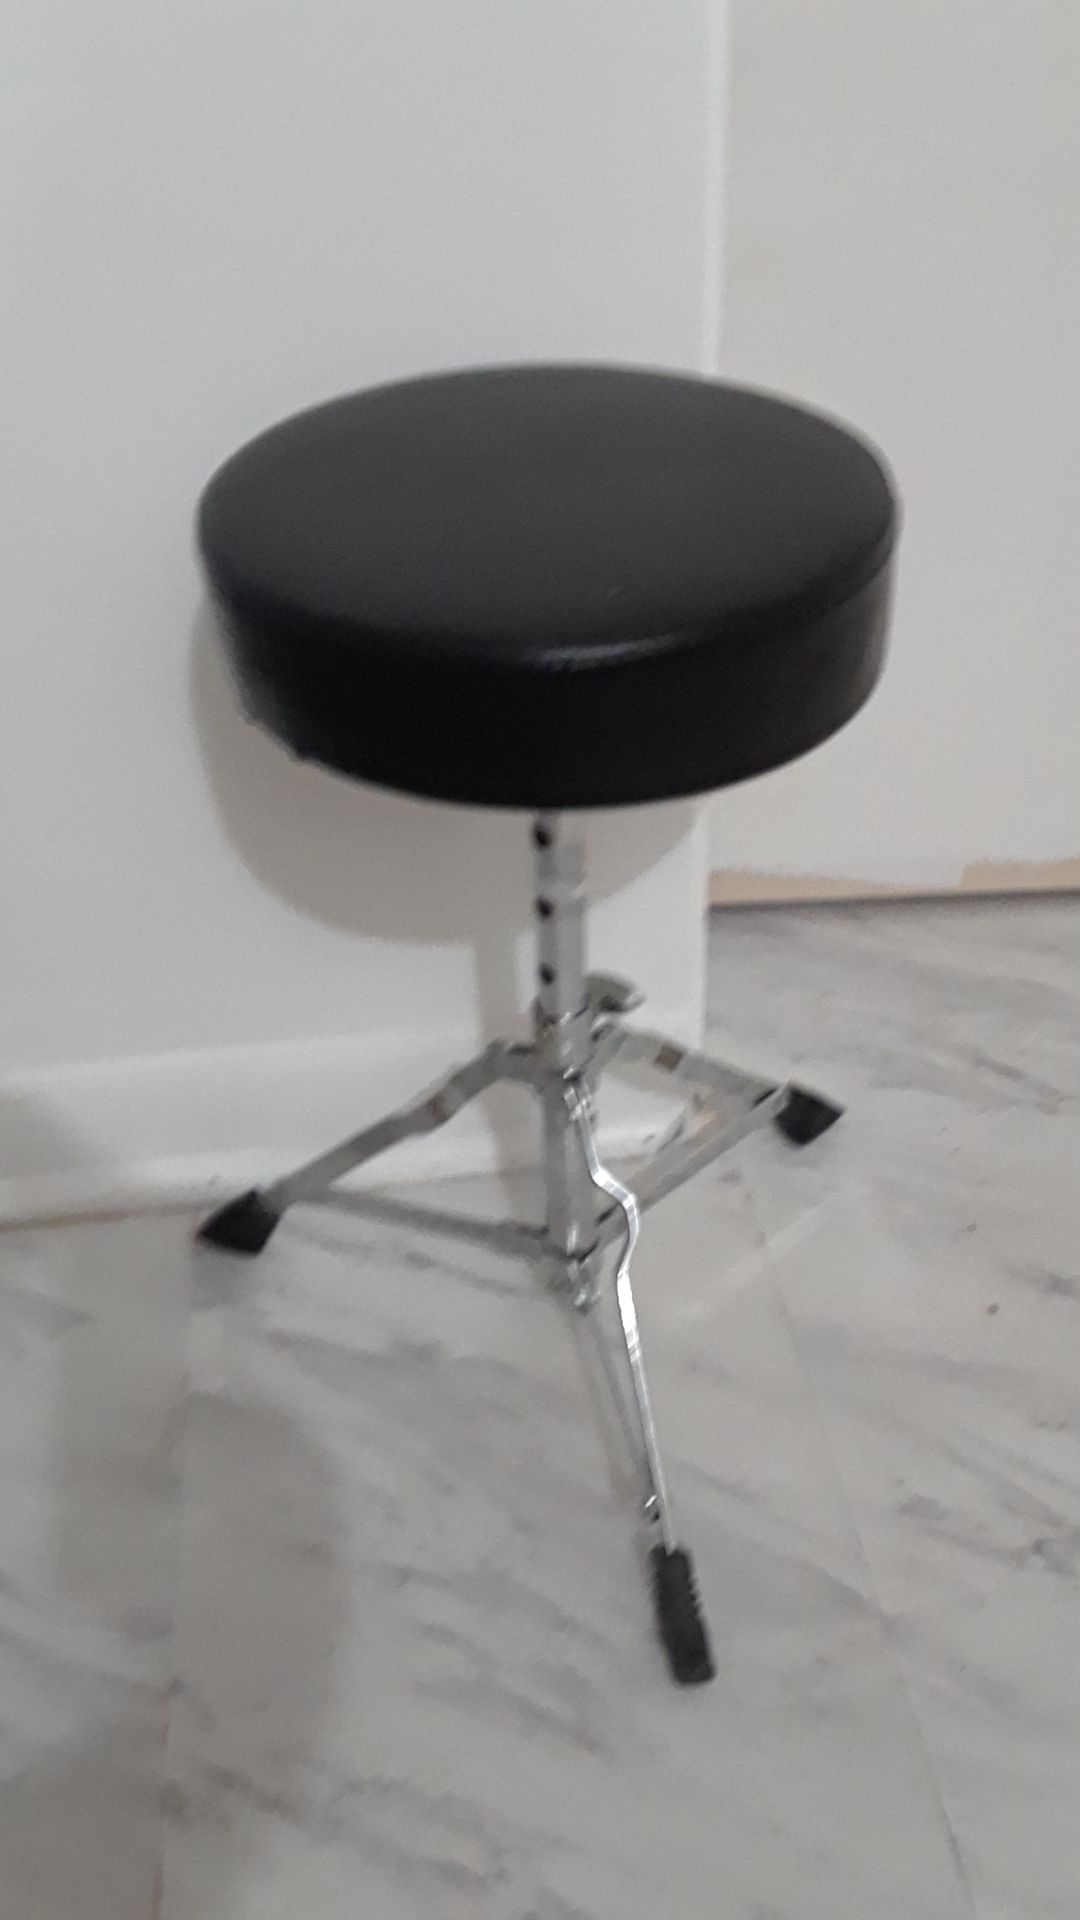 Adjustable Drummer or Musicians Chair or Stool